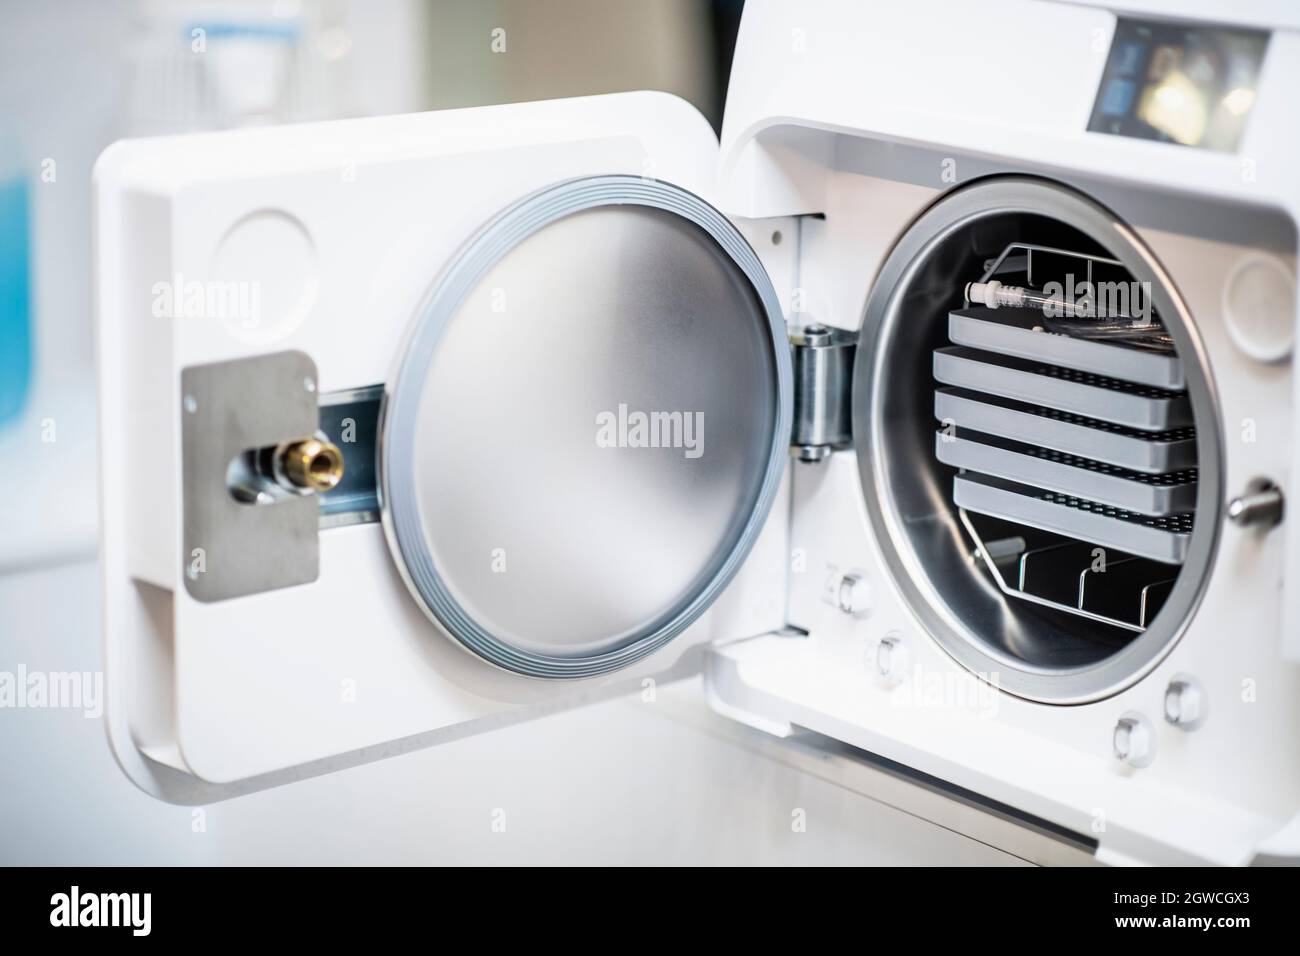 Autoclave In Dentist Office. Dental Infection Control And Sterilization Stock Photo